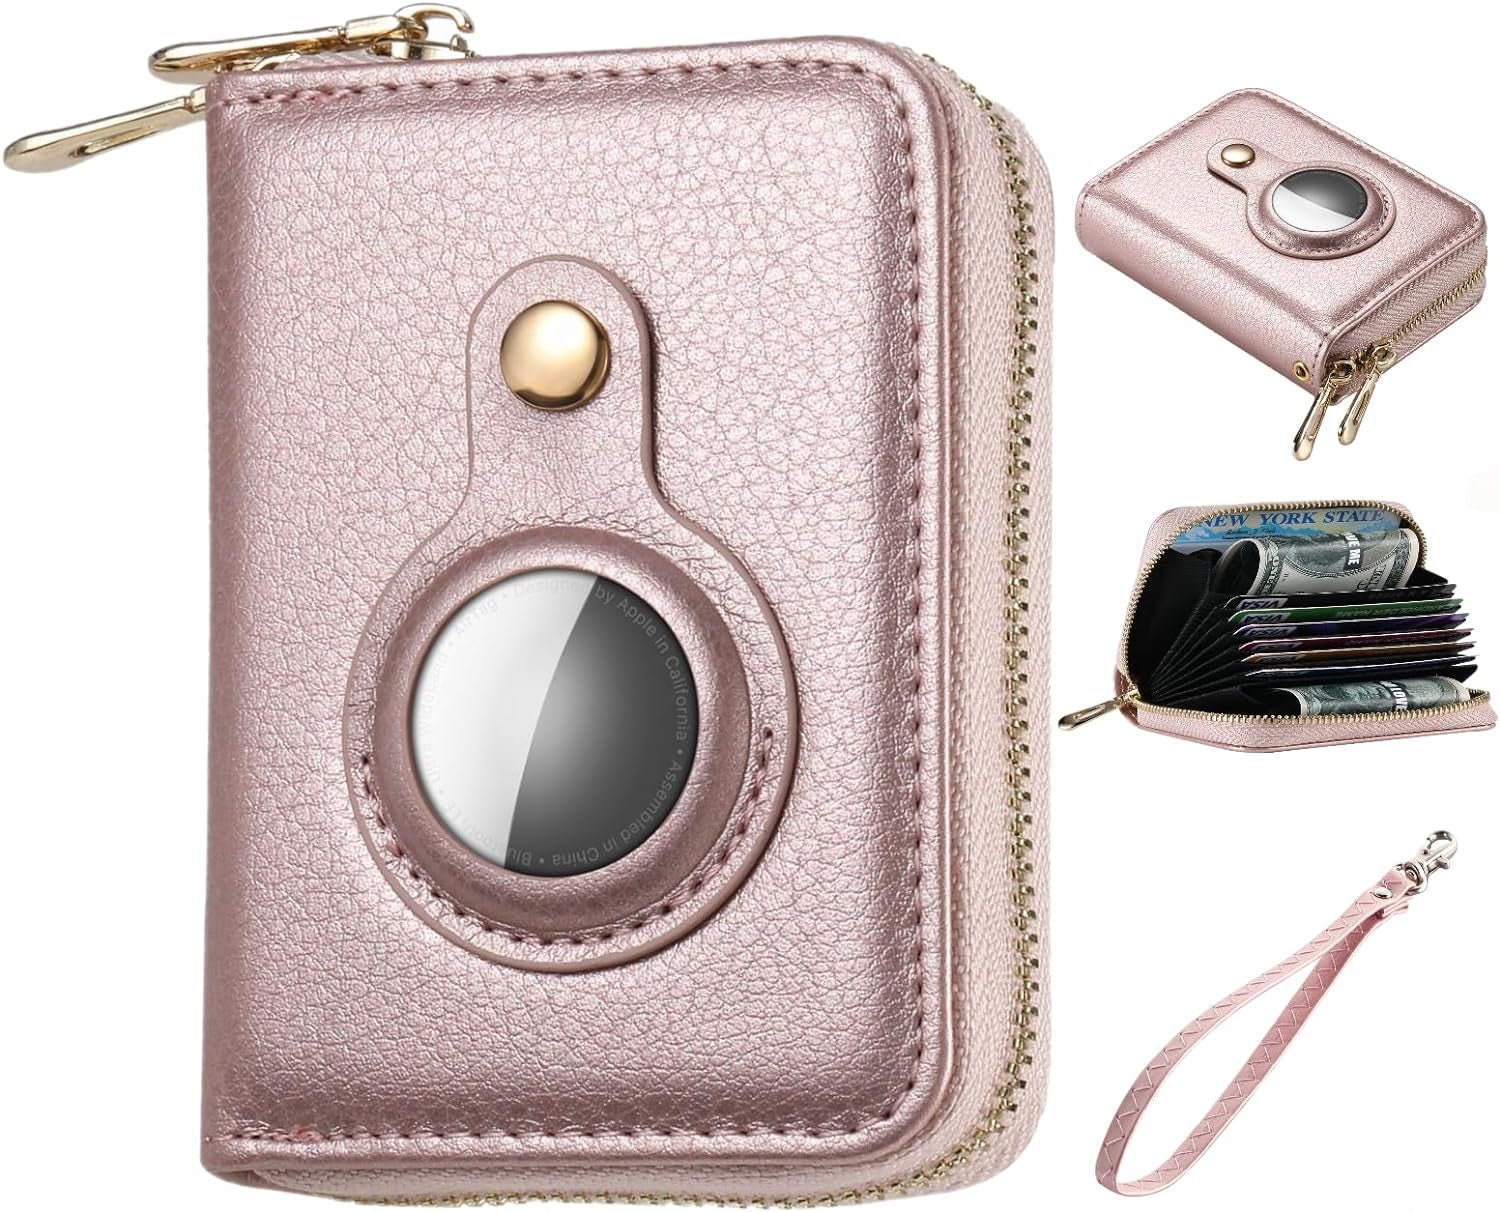 ABBY's RFID Blocking AirTag Wallet for Women - Slim Rose Gold PU Leather Zipper Wallet - Abbycart